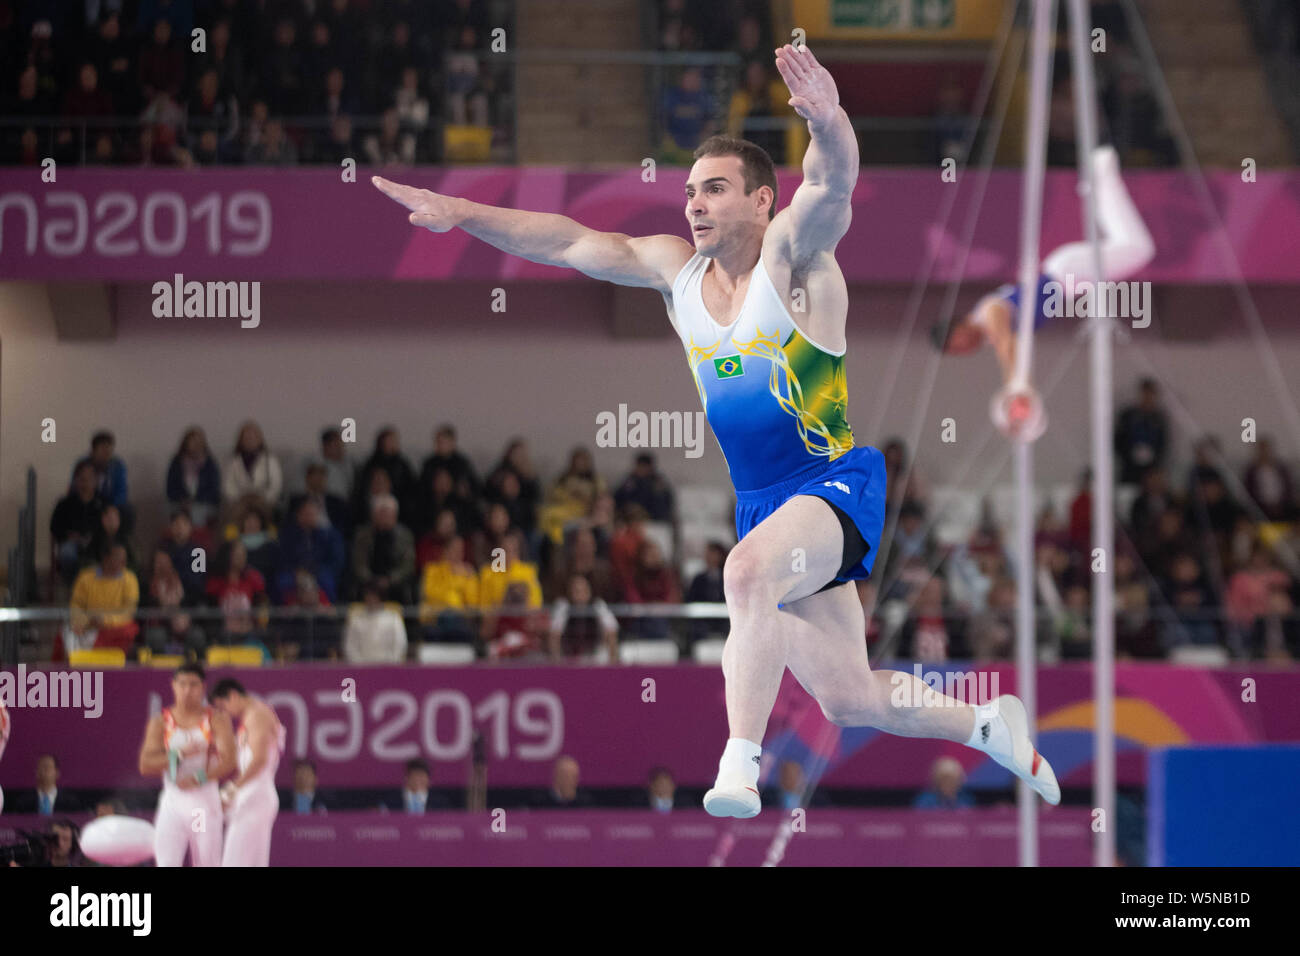 Lima, Peru. 28th July, 2019. Arthur Zanetti (#81) of Brazil warms up priorate his floor routine the Pan American Games Artistic Gymnastics, Men's Team Qualification and Final at Polideportivo Villa el Salvador in Lima, Peru. Daniel Lea/CSM/Alamy Live News Stock Photo